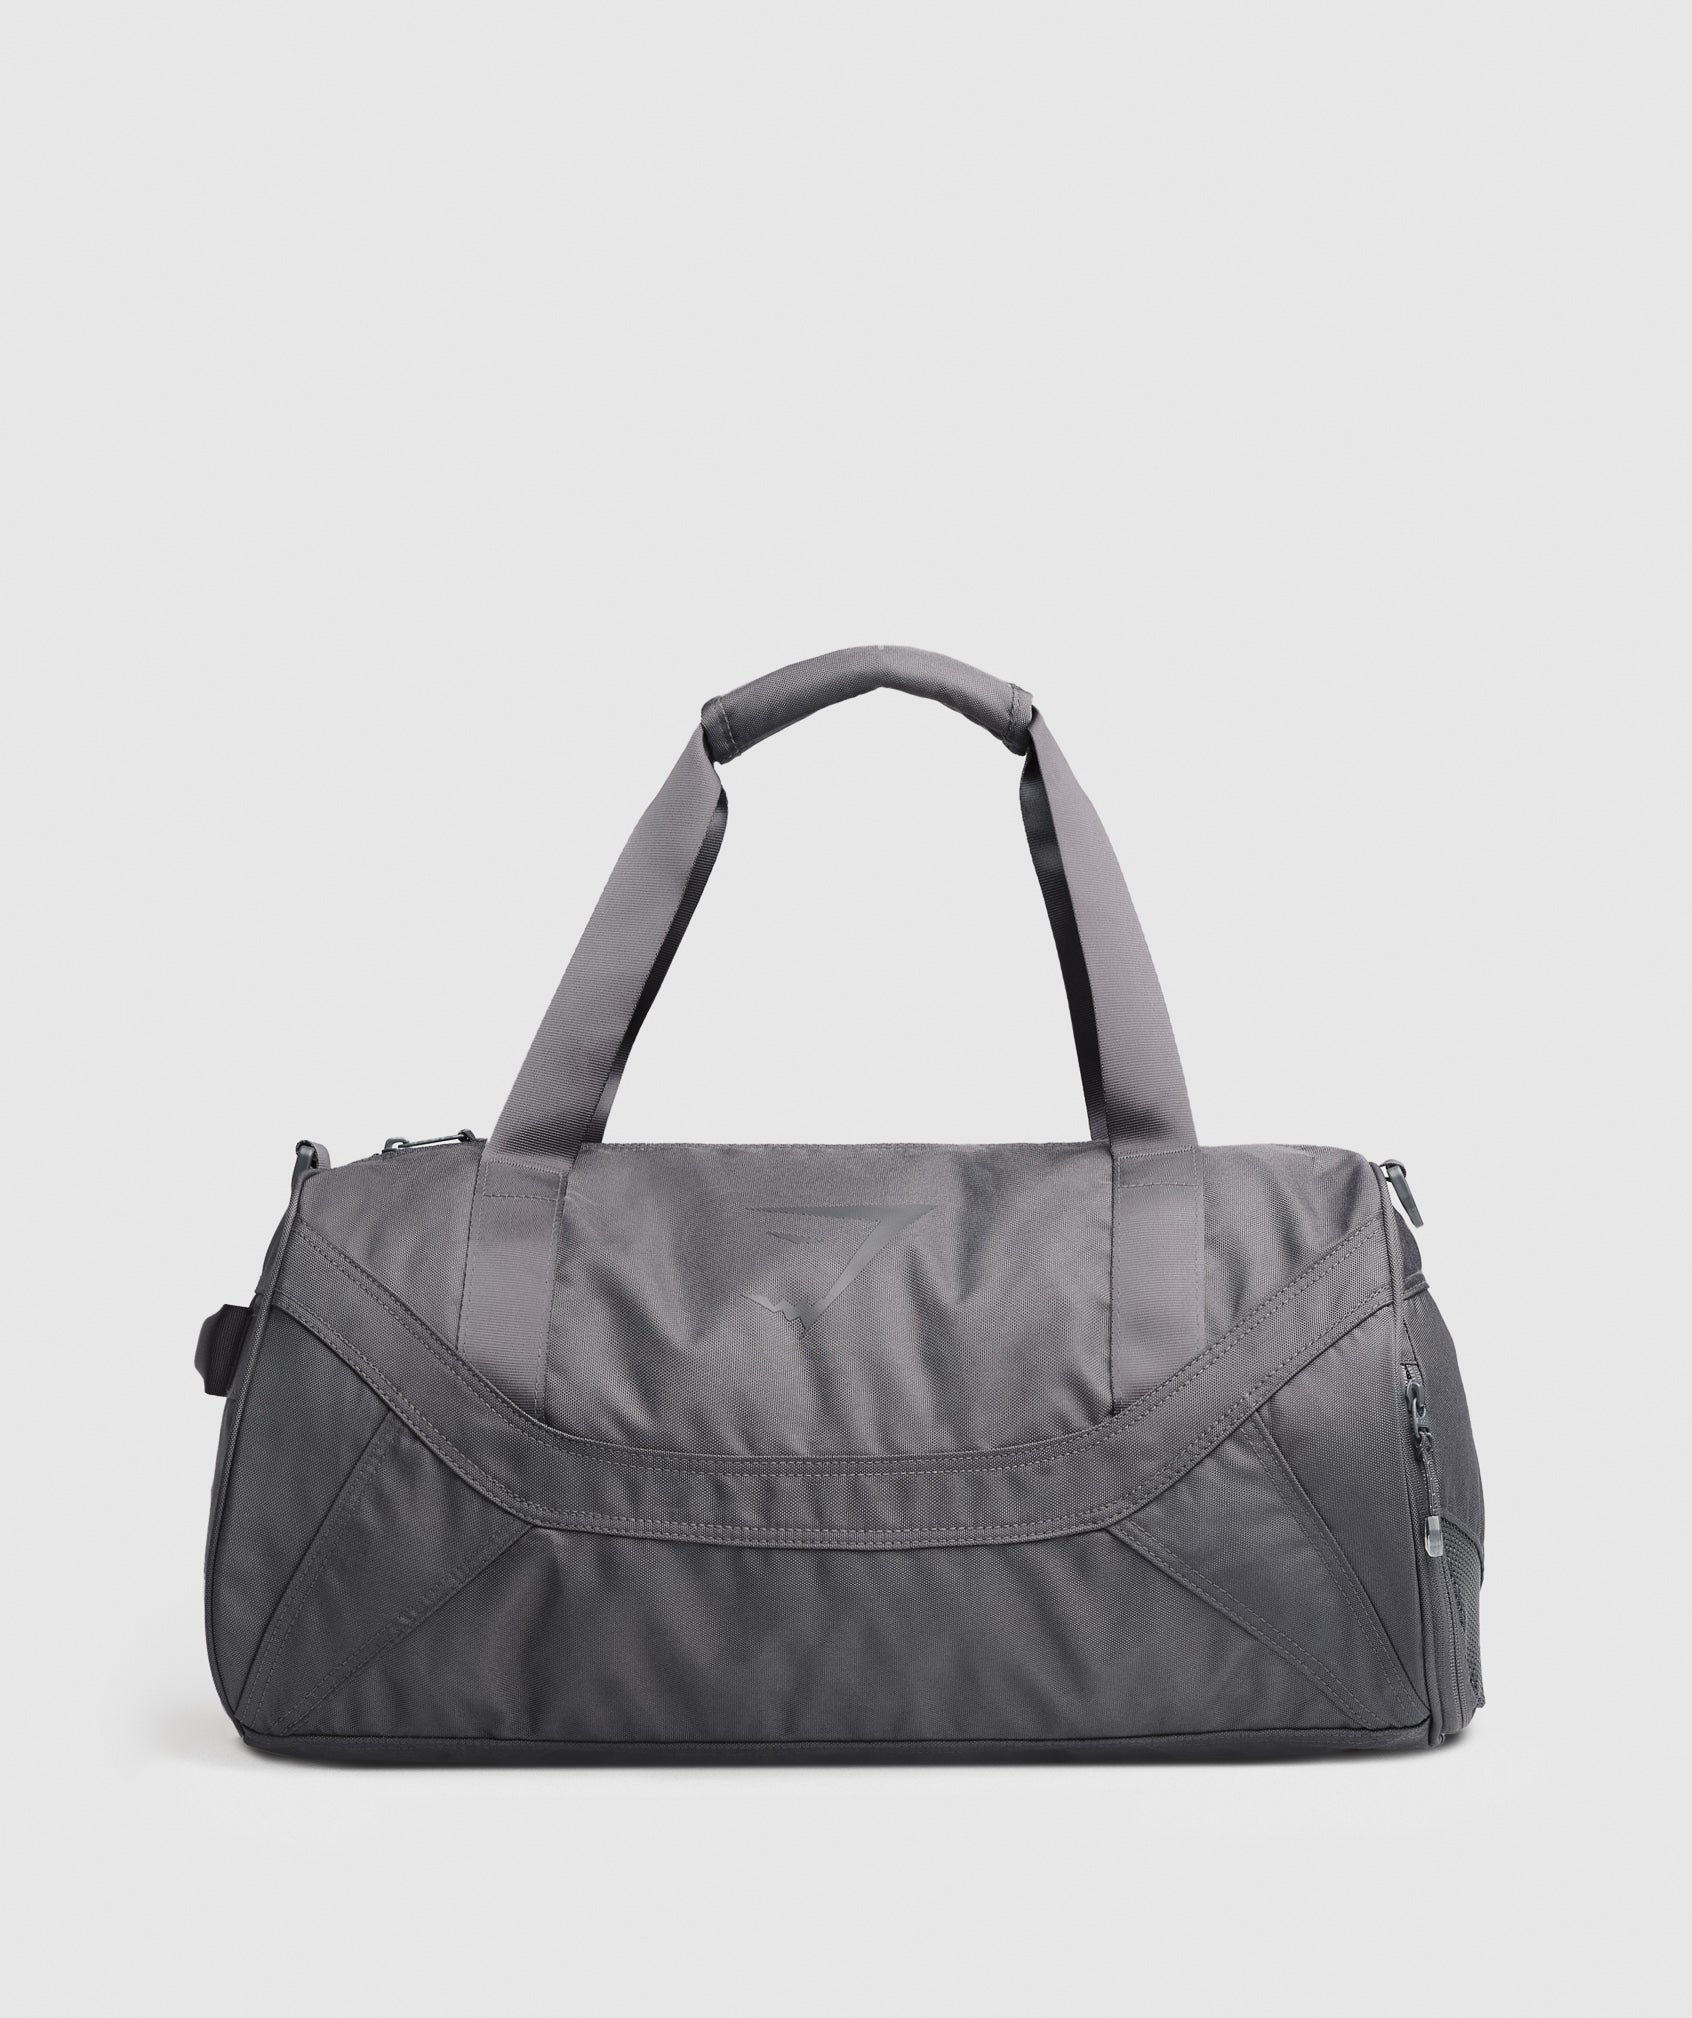 Sharkhead Gym Bag in Graphite Grey - view 1